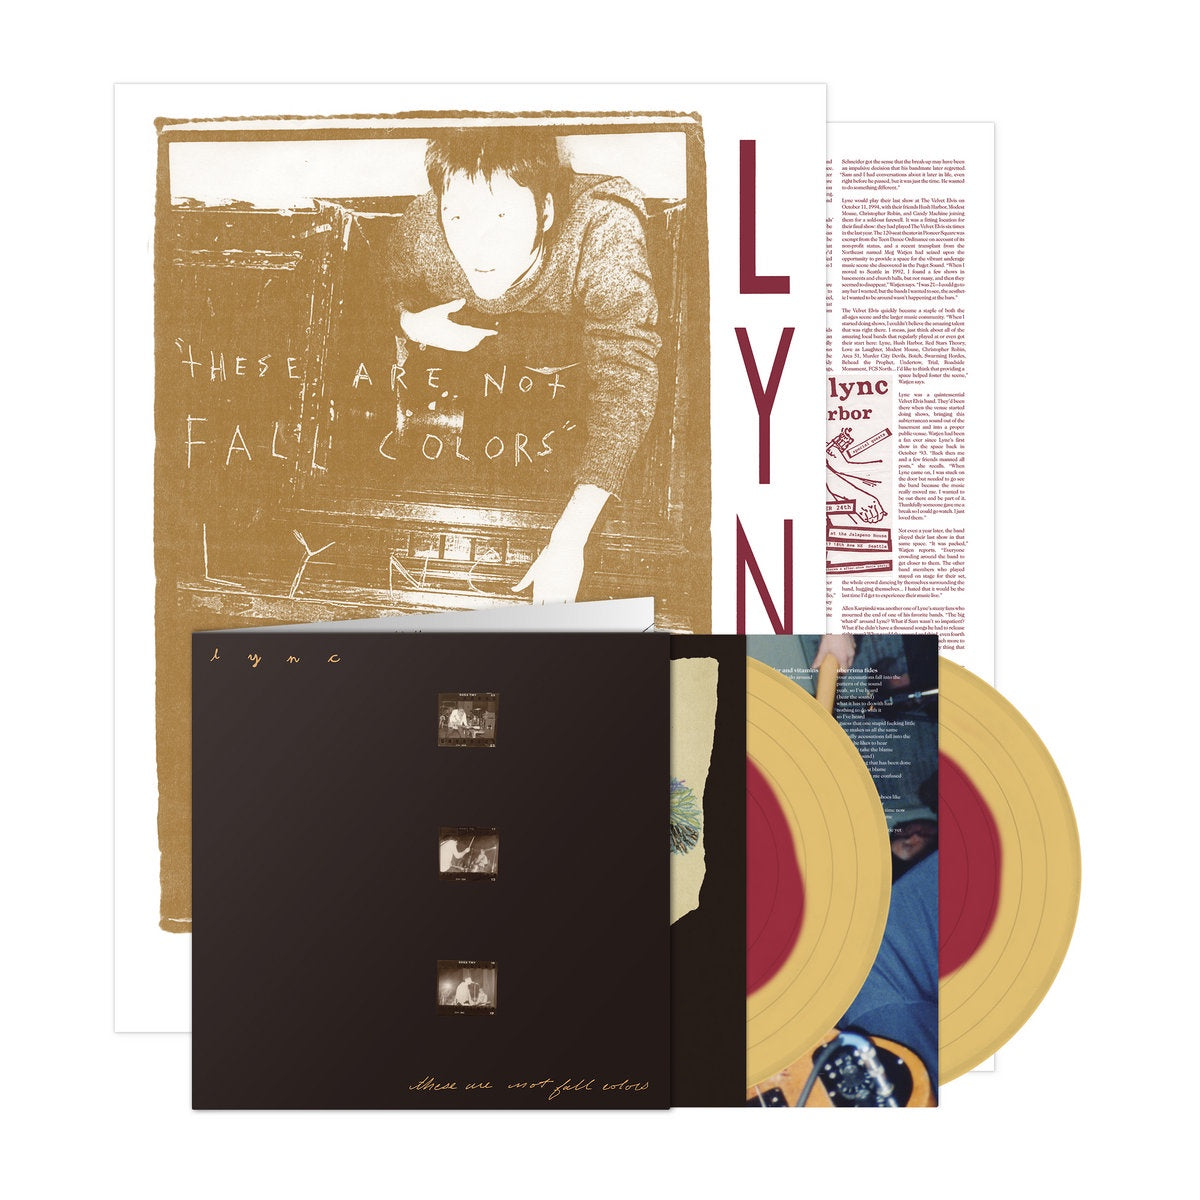 Lync - These Are Not Fall Colors (1994) - New 2 LP Record 2023 Suicide Squeeze Red in Yellow Vinyl - Indie Rock / Post-Hardcore / Emo